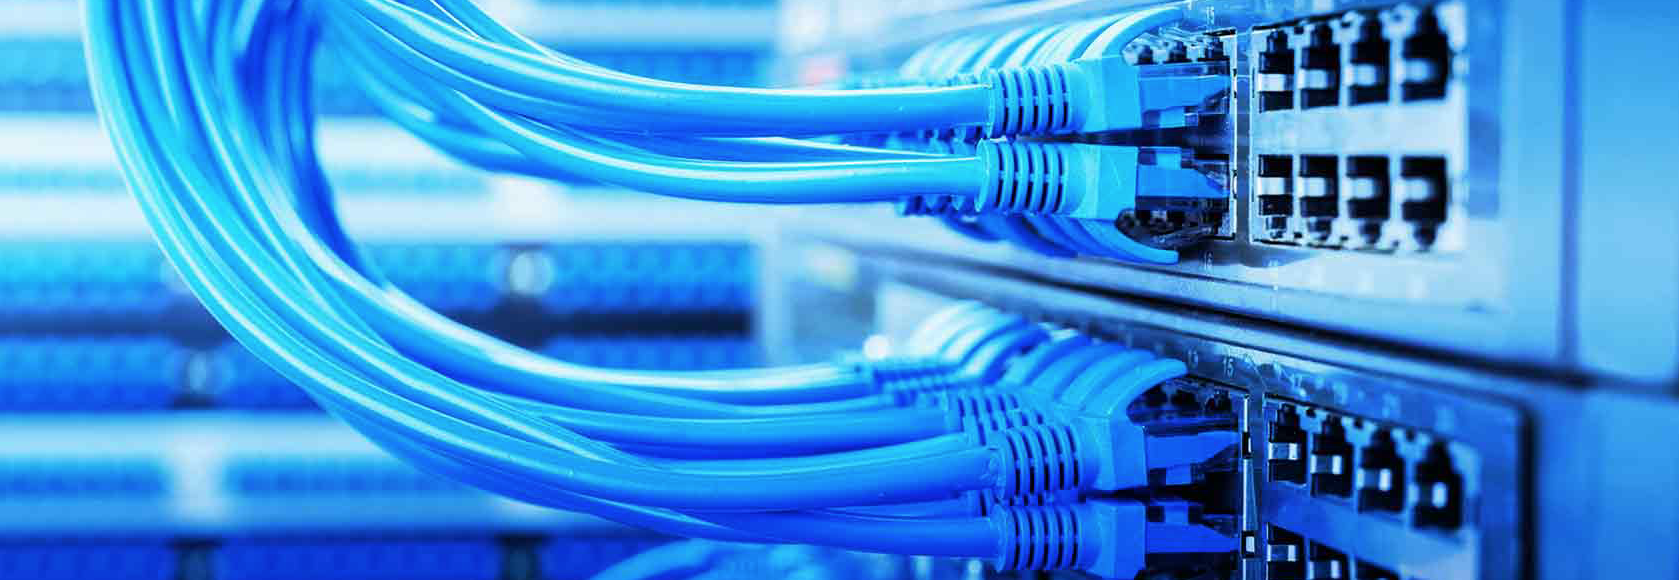 Structured Cabling Mistar Communications